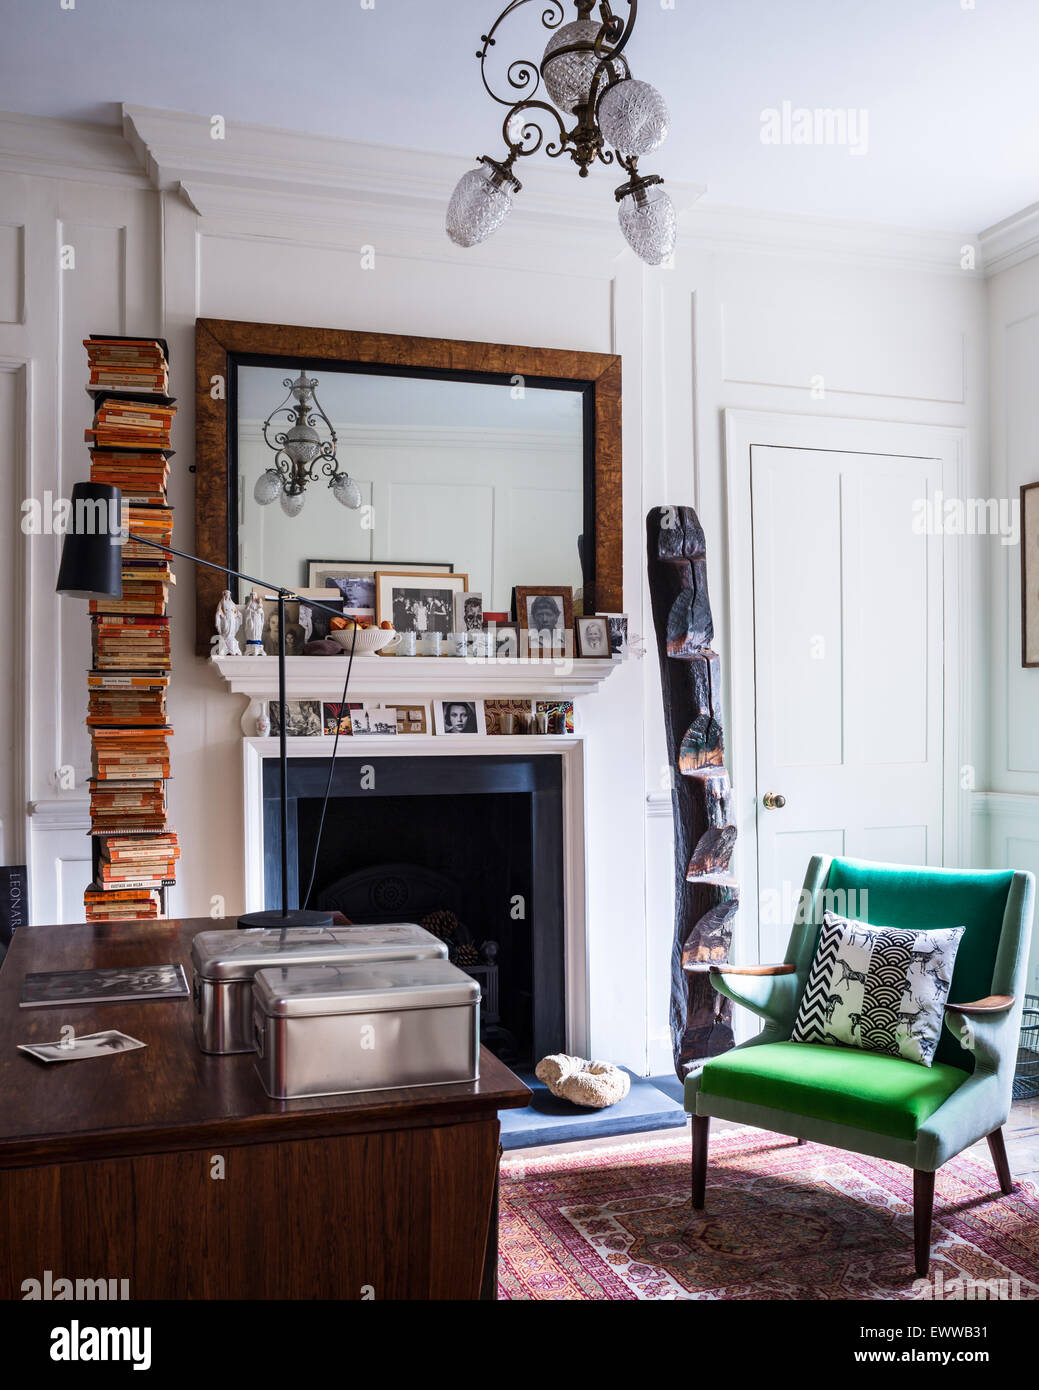 Mid century green armchair in study with persian rug, mantelpiece and stacked books Stock Photo